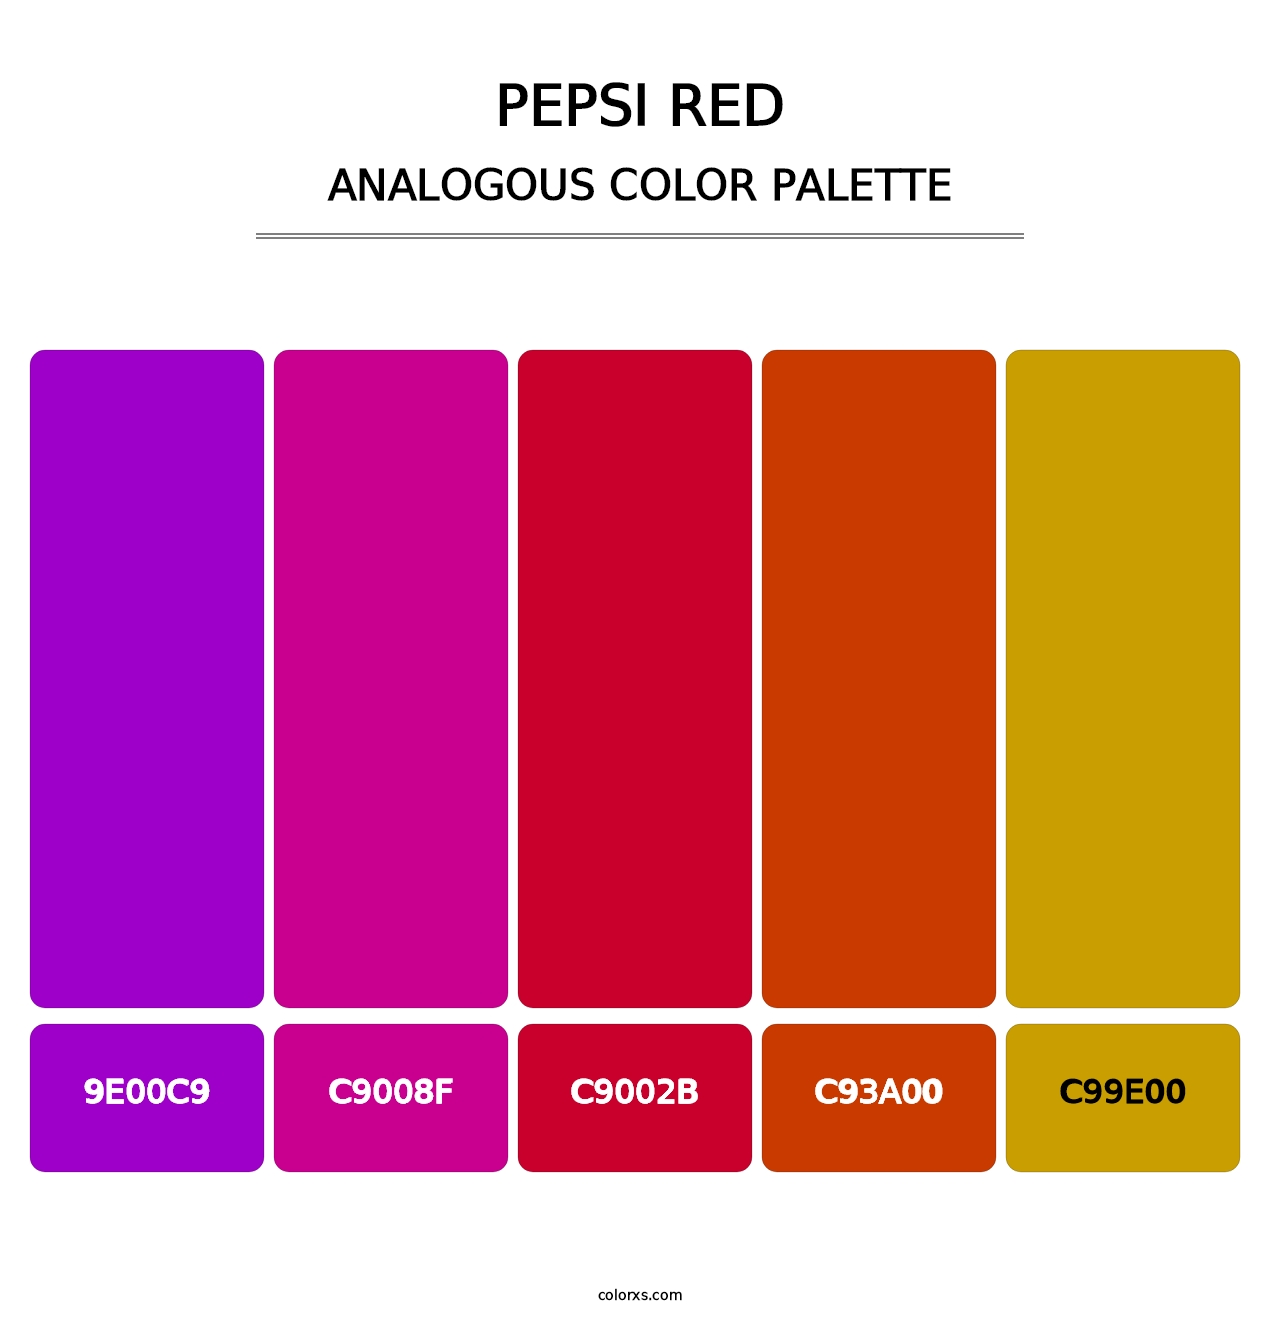 Pepsi Red - Analogous Color Palette